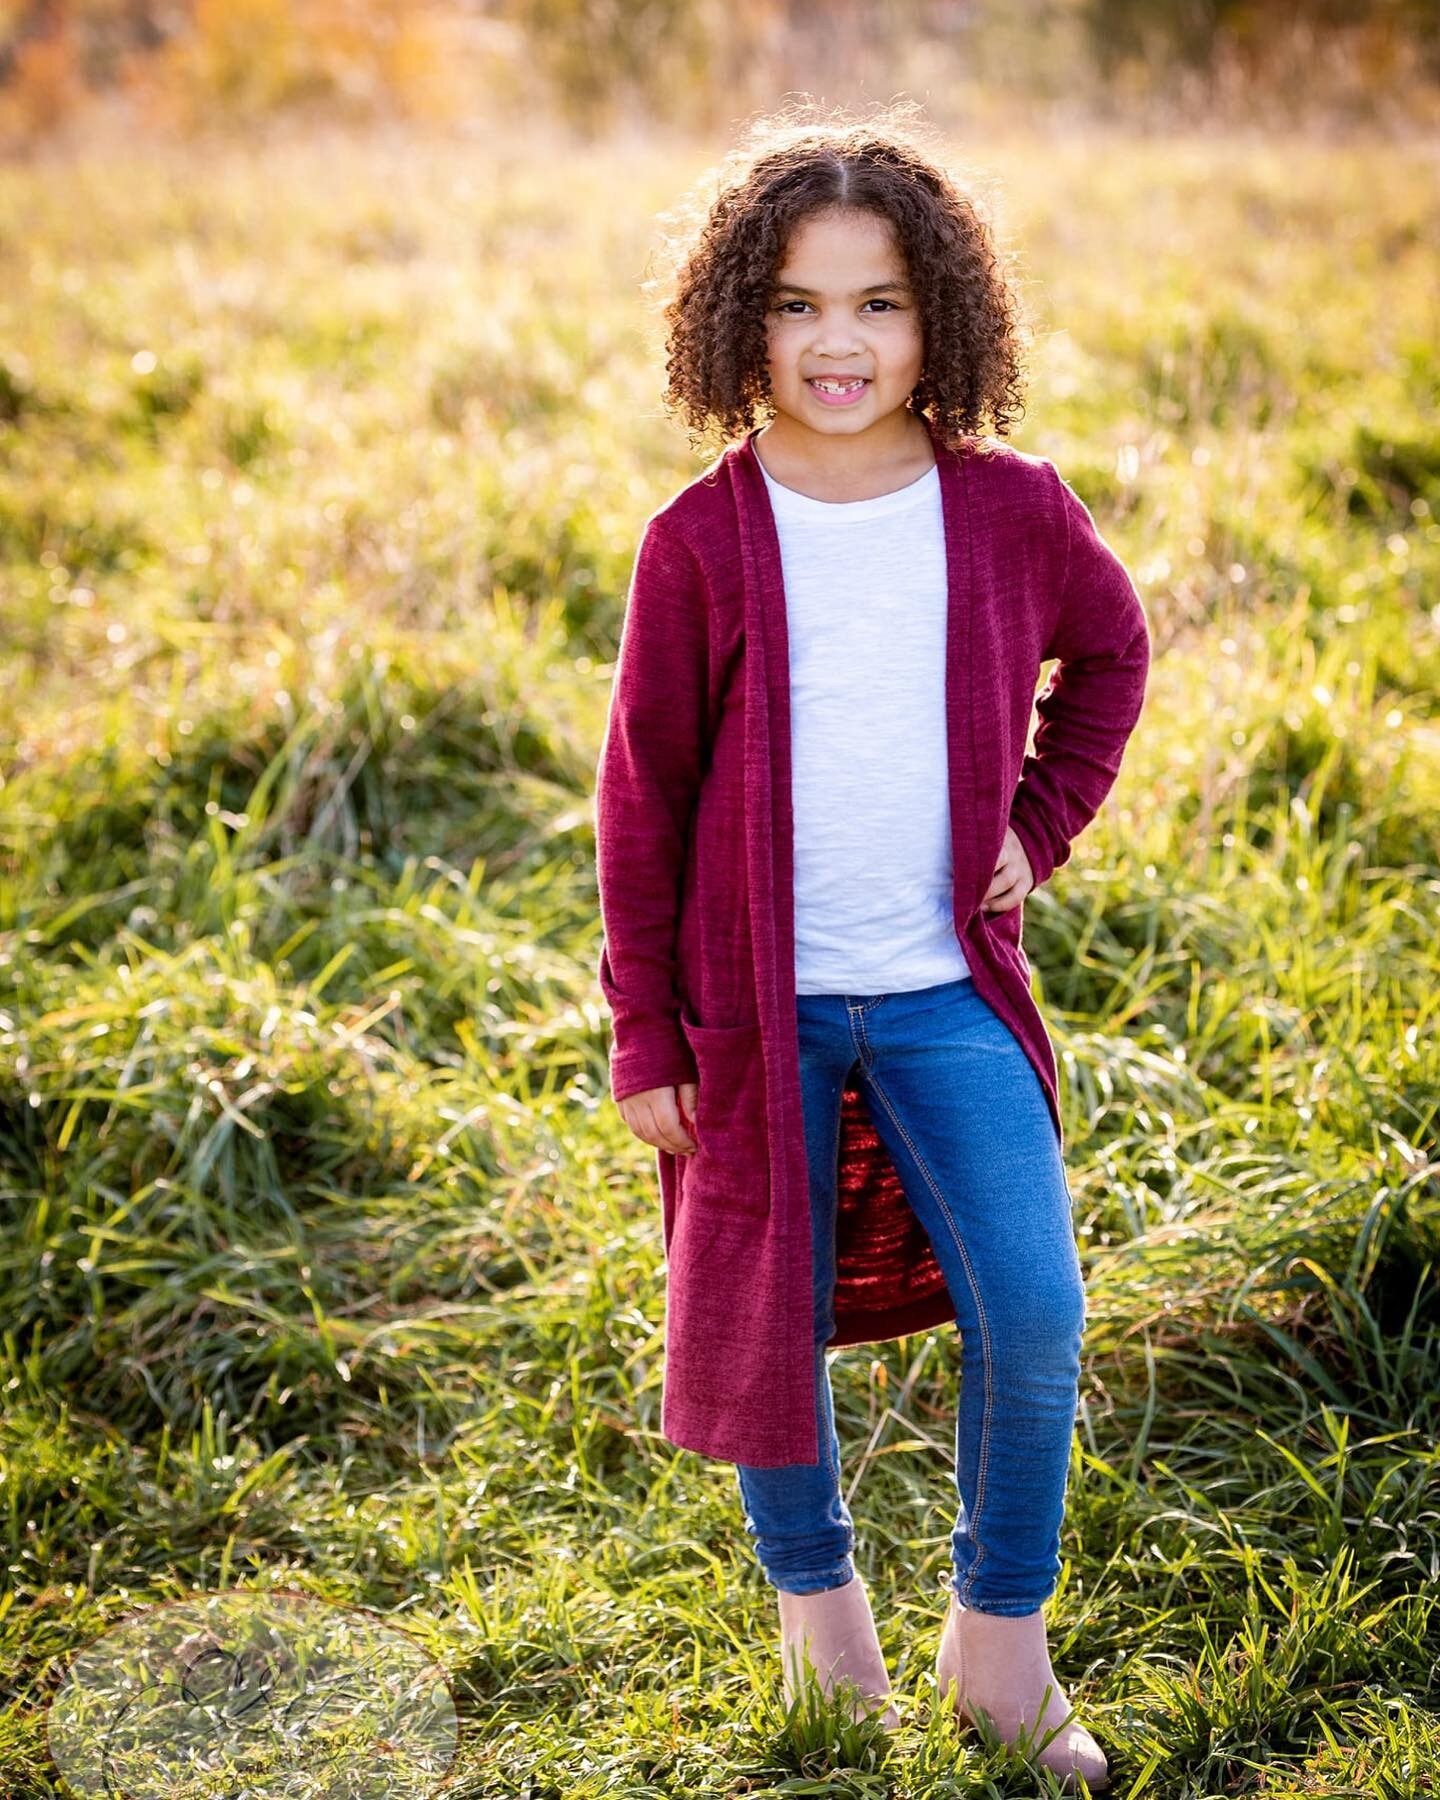 Sometimes when it&rsquo;s frigidly cold, you have to think of warmer times&hellip; and just look at that pose! #photography #familyphotography #childrenphotography #outdoorphotography #naturallight #naturallight #goldenhour #pose #centralmaphotograph